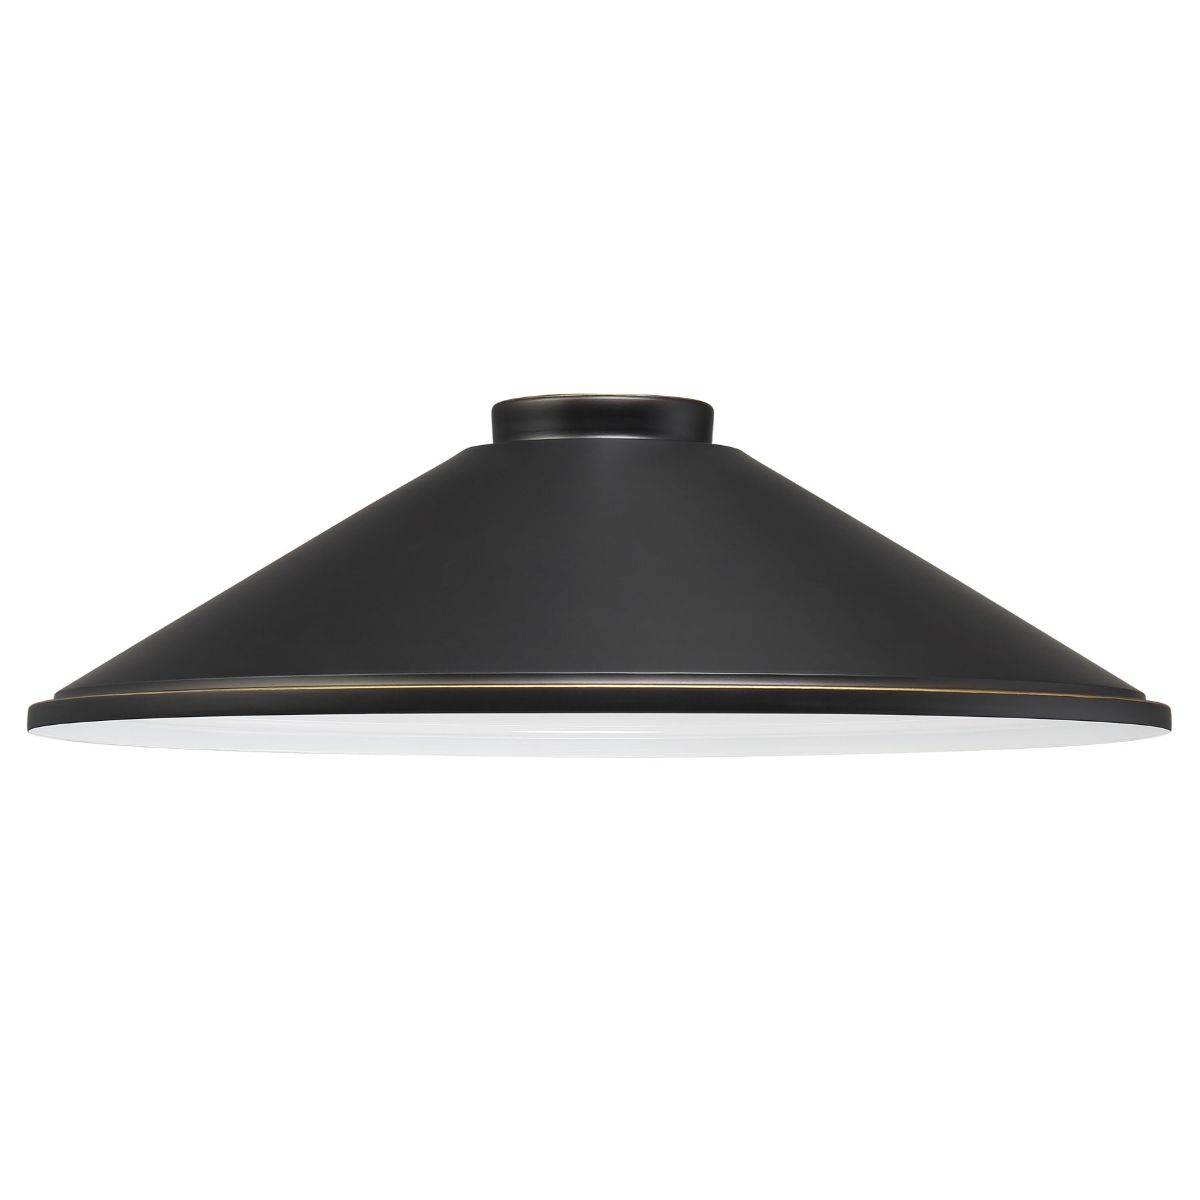 RLM 18 in. Cone Path Light Shade Oil Rubbed Bronze & matte Gold finish